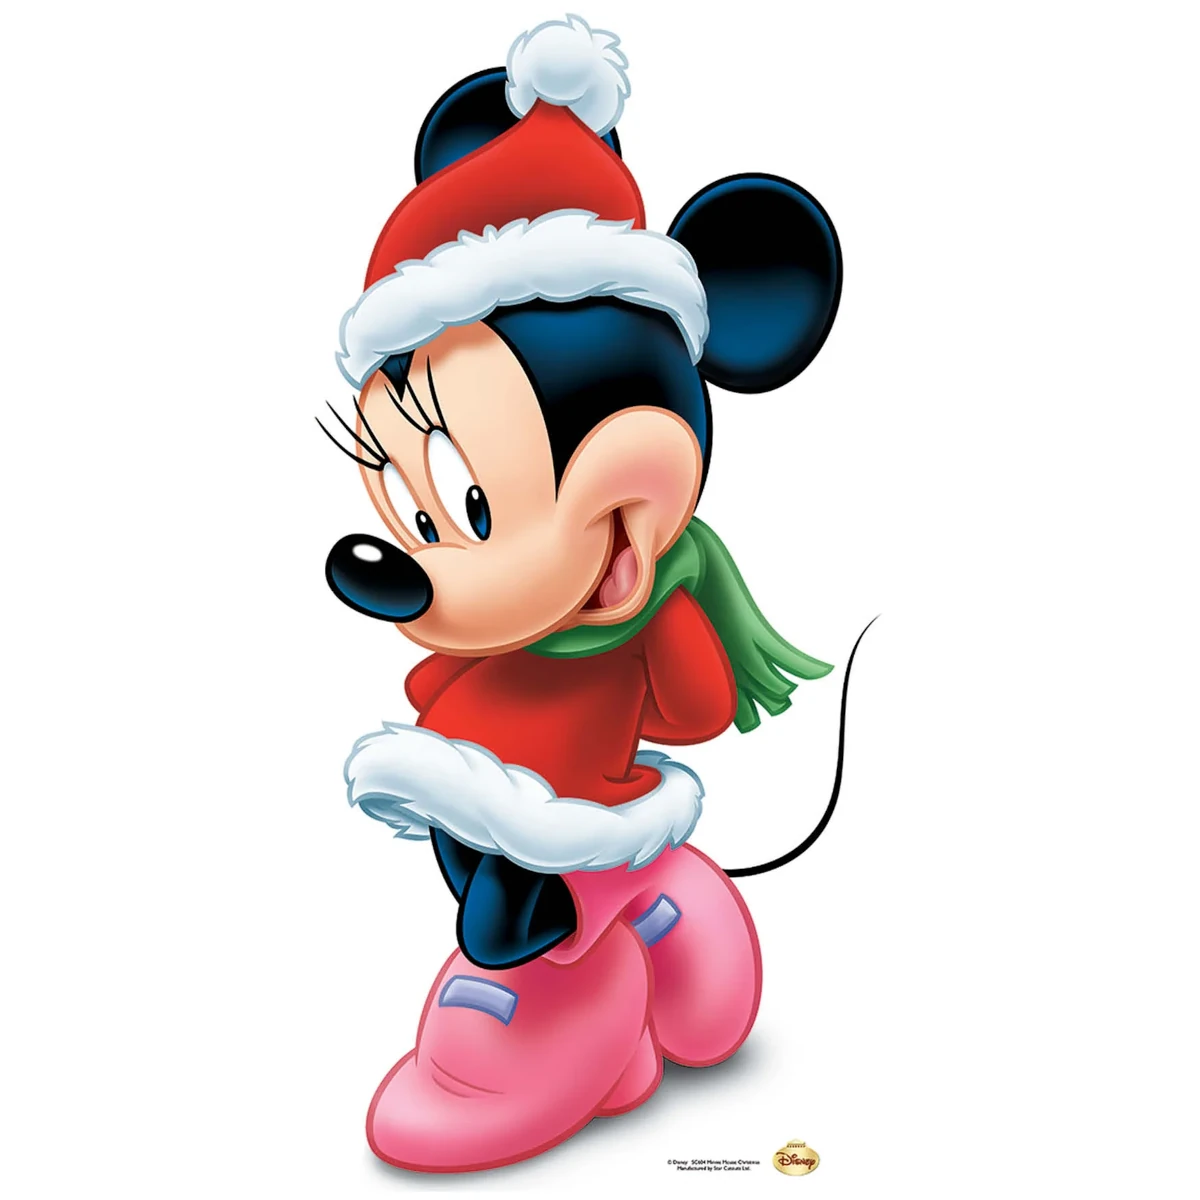 SC604 Minnie Mouse ‘Christmas Costume’ (Disney) Mini Cardboard Cutout Standee Front